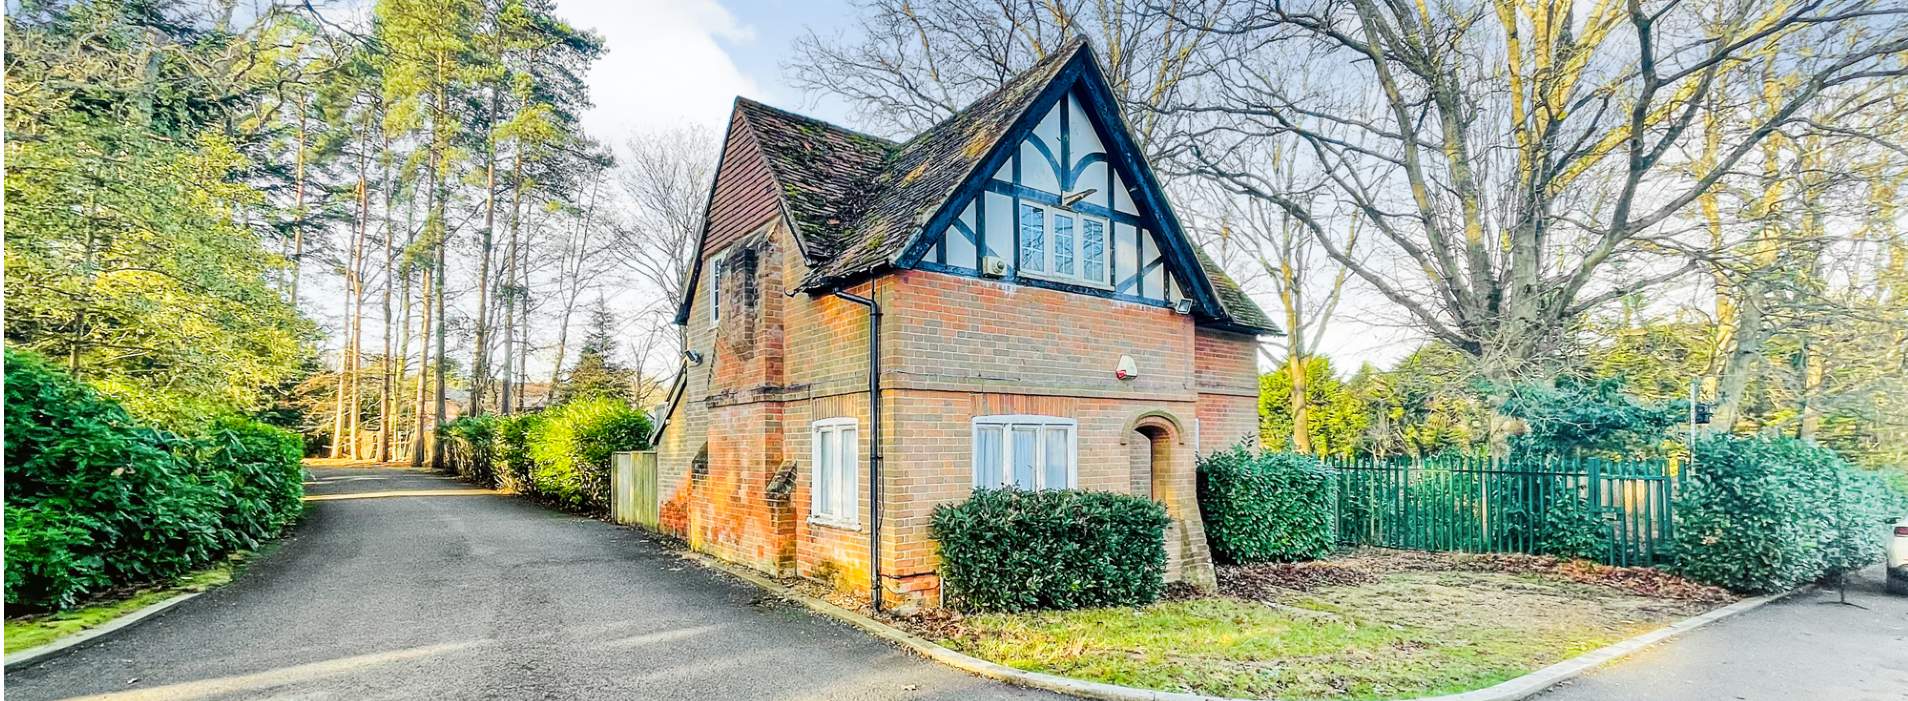 Lot 54 The Lodge Charters, Charters Road, Ascot, Berkshire